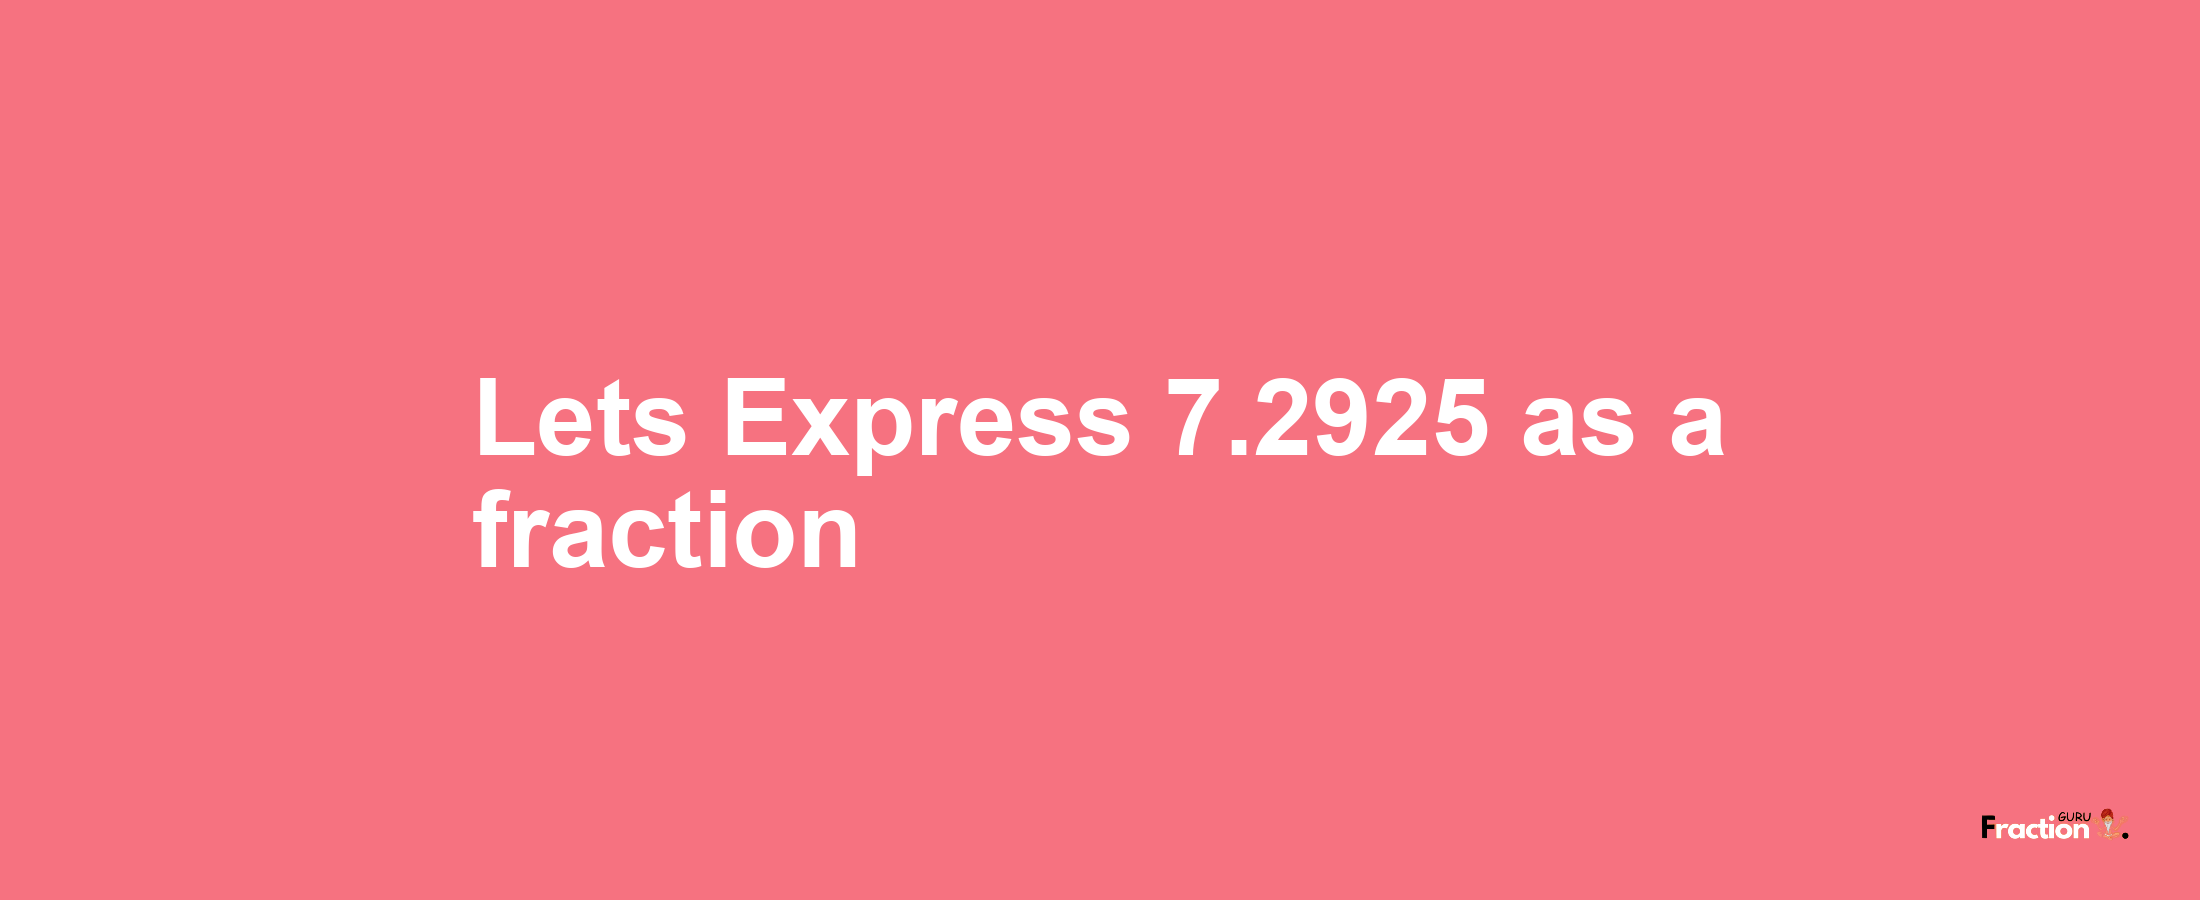 Lets Express 7.2925 as afraction